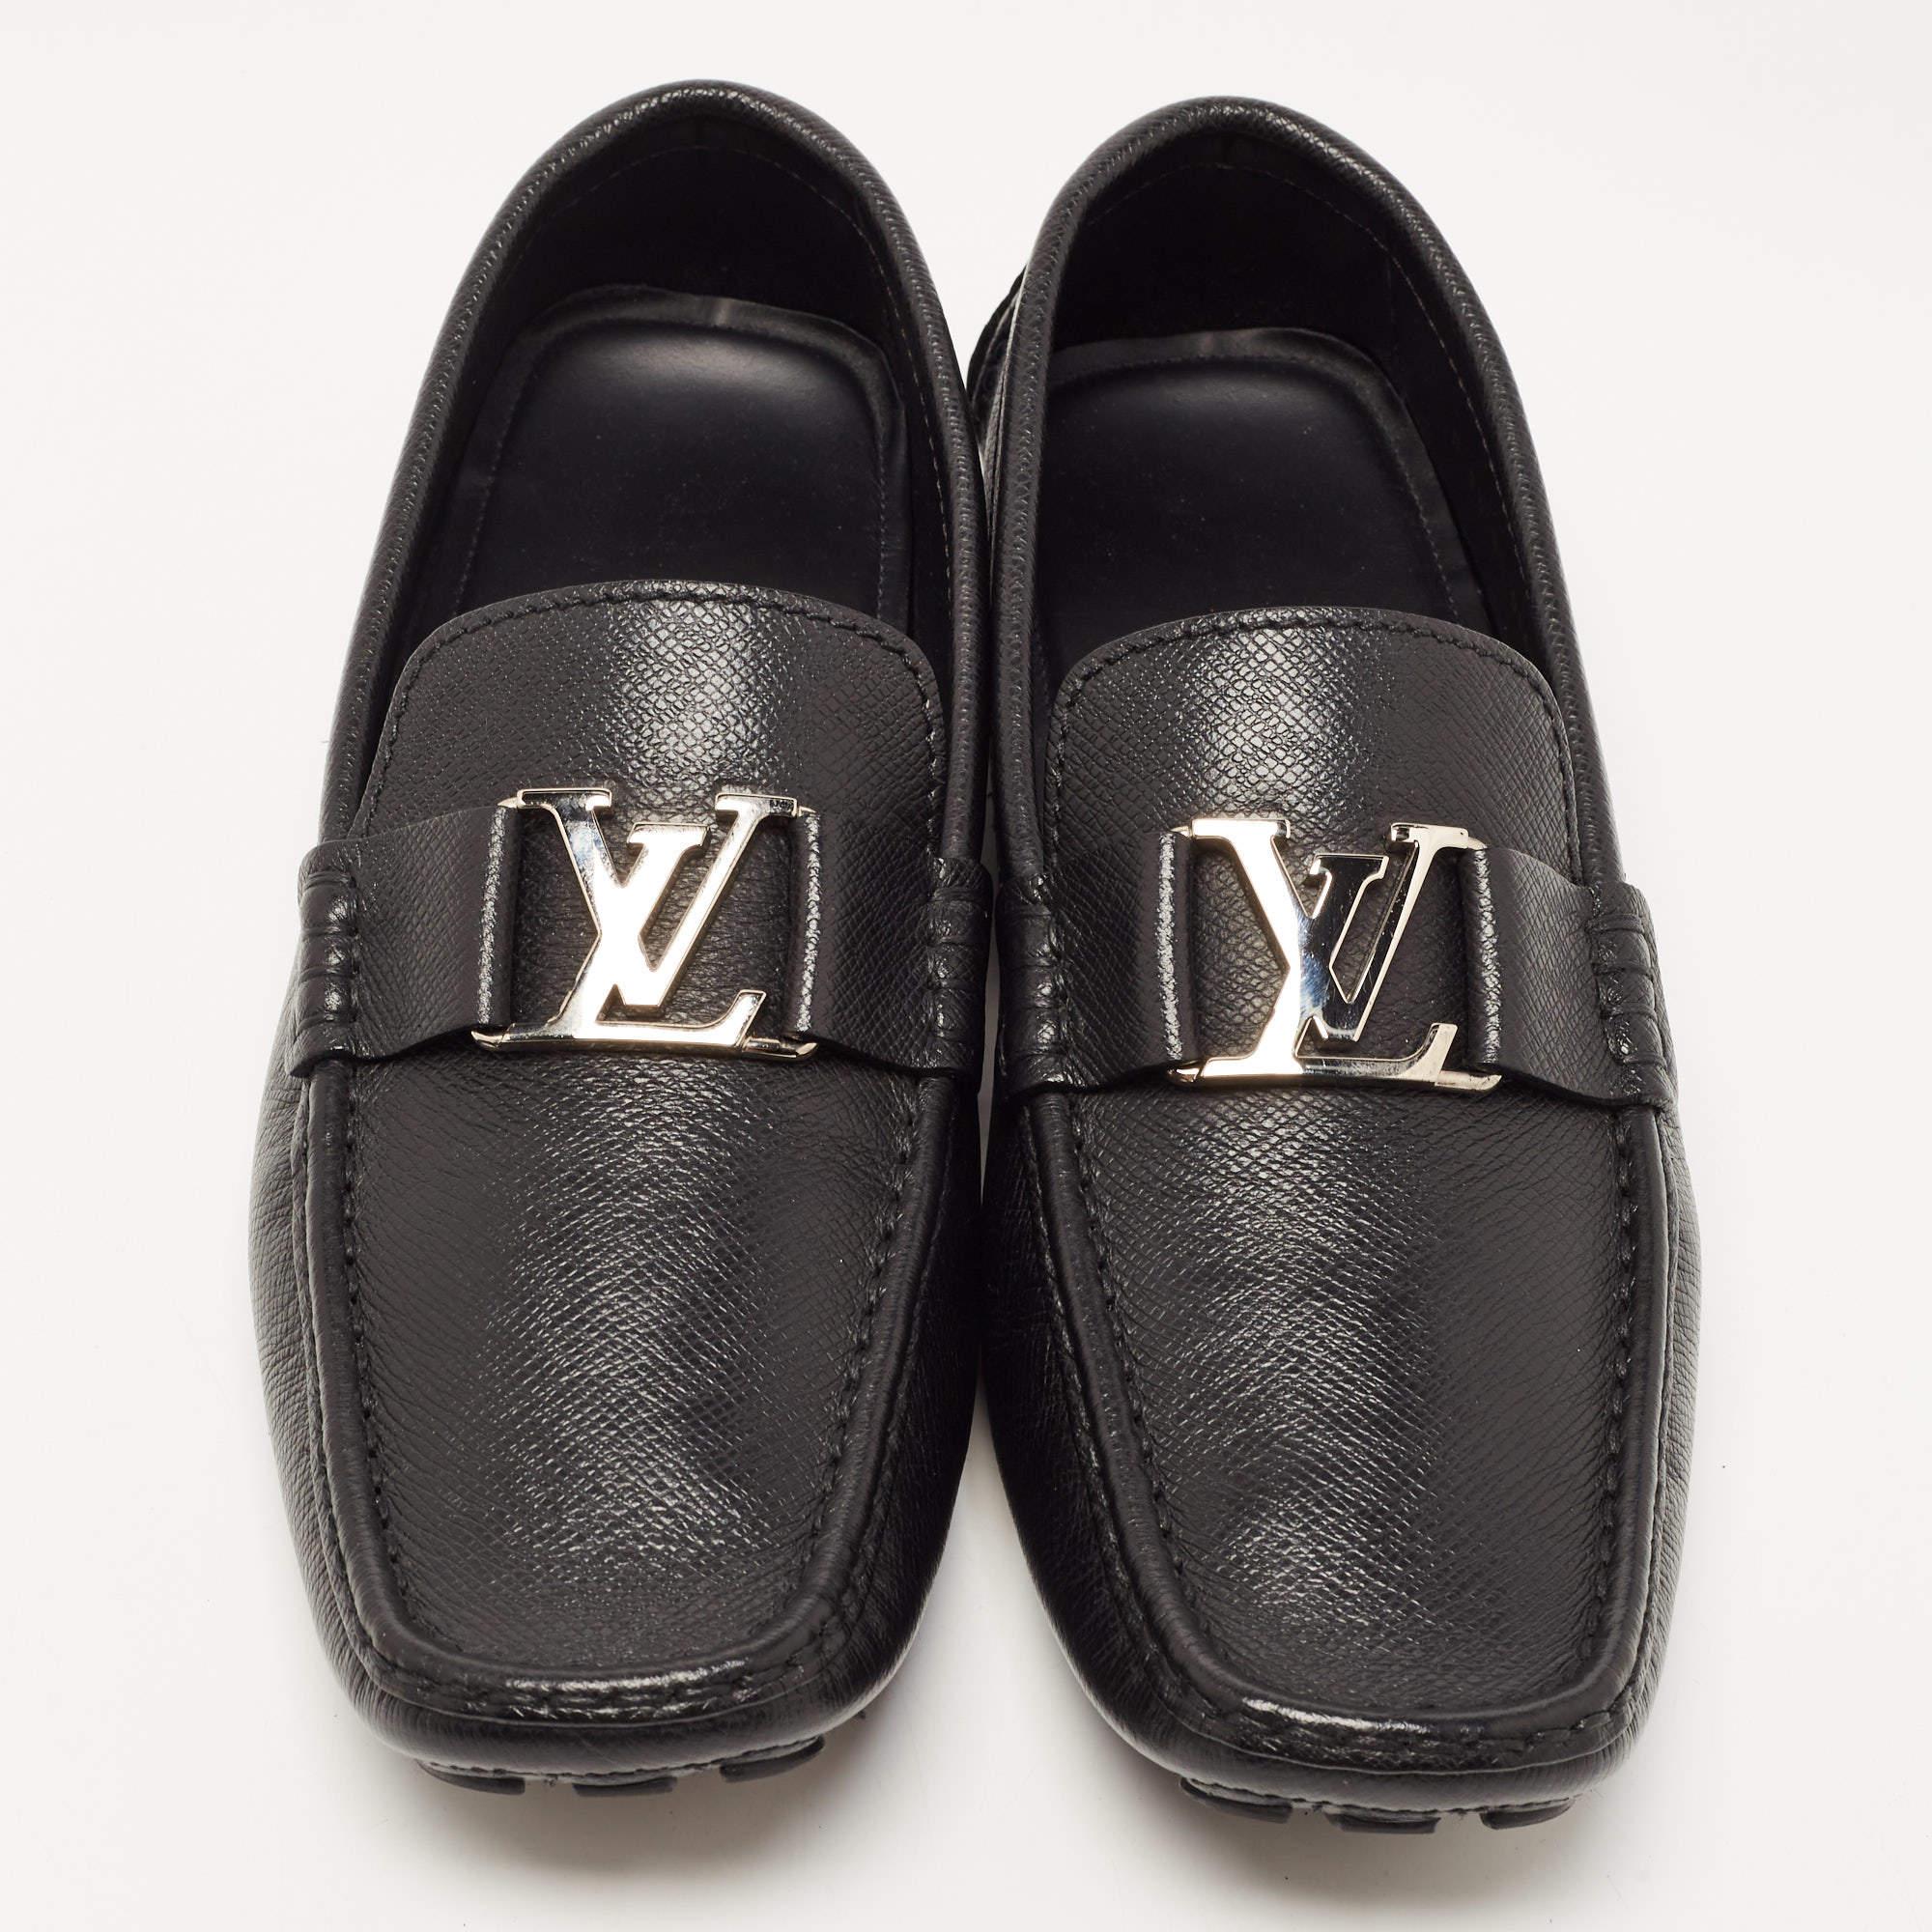 Practical, fashionable, and durable—these LV loafers are carefully built to be fine companions to your everyday style. They come made using the best materials to be a prized buy.

Includes
Original Dustbag, Original Box, Info Booklet